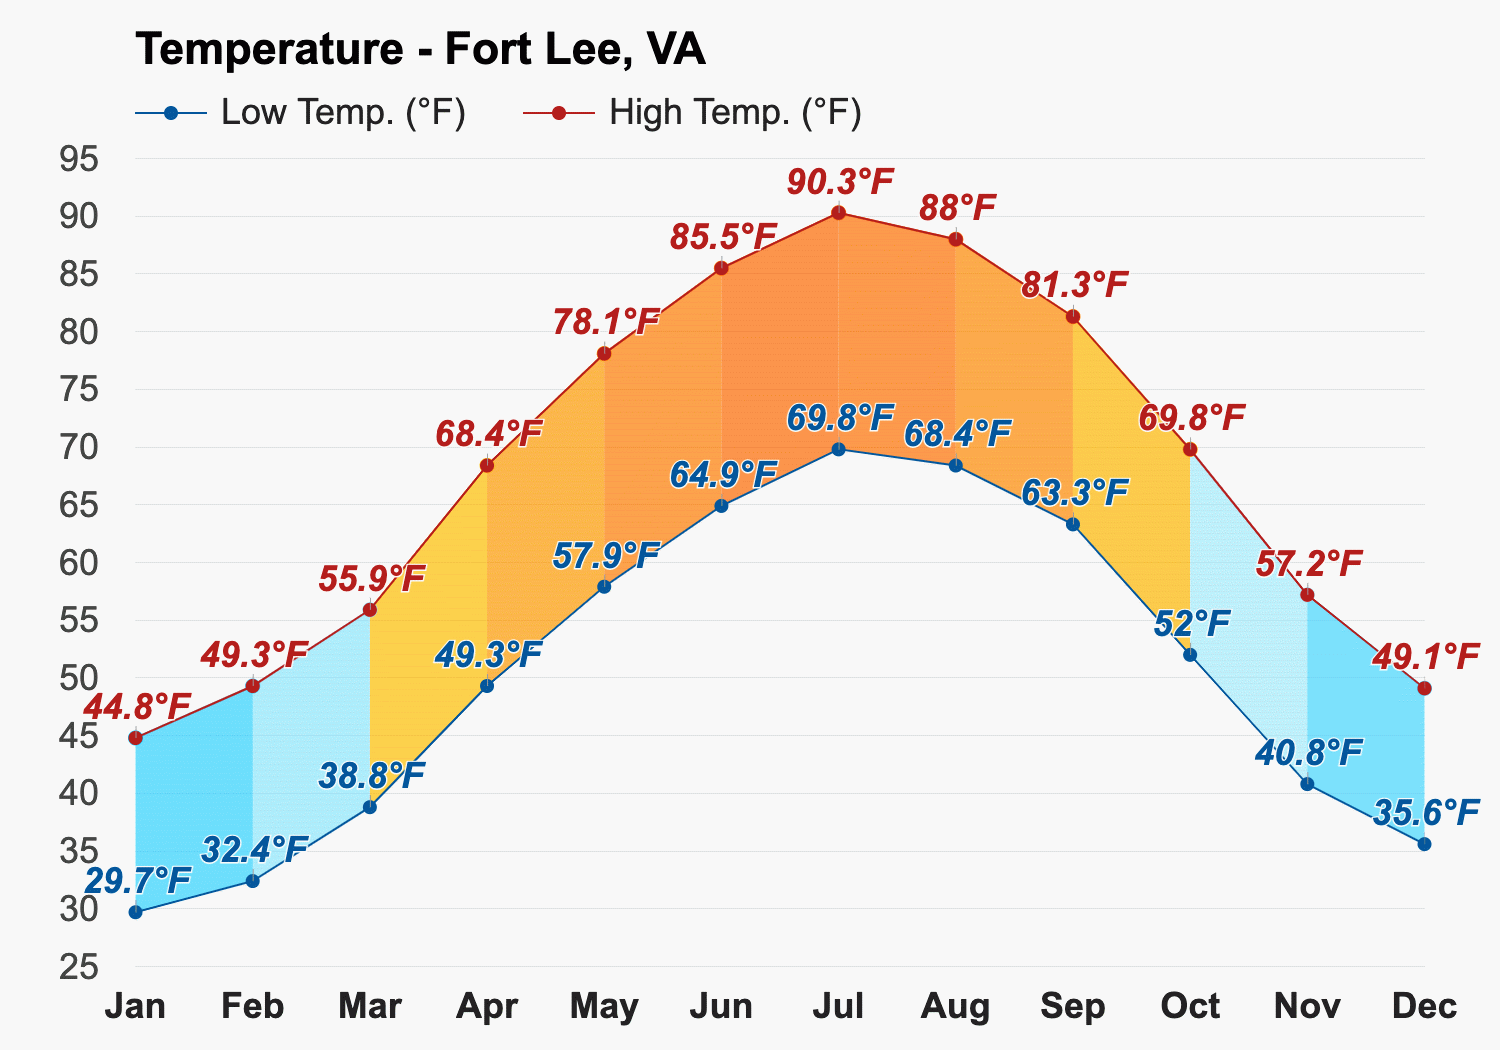 Fort Lee, VA - Climate & Monthly weather forecast